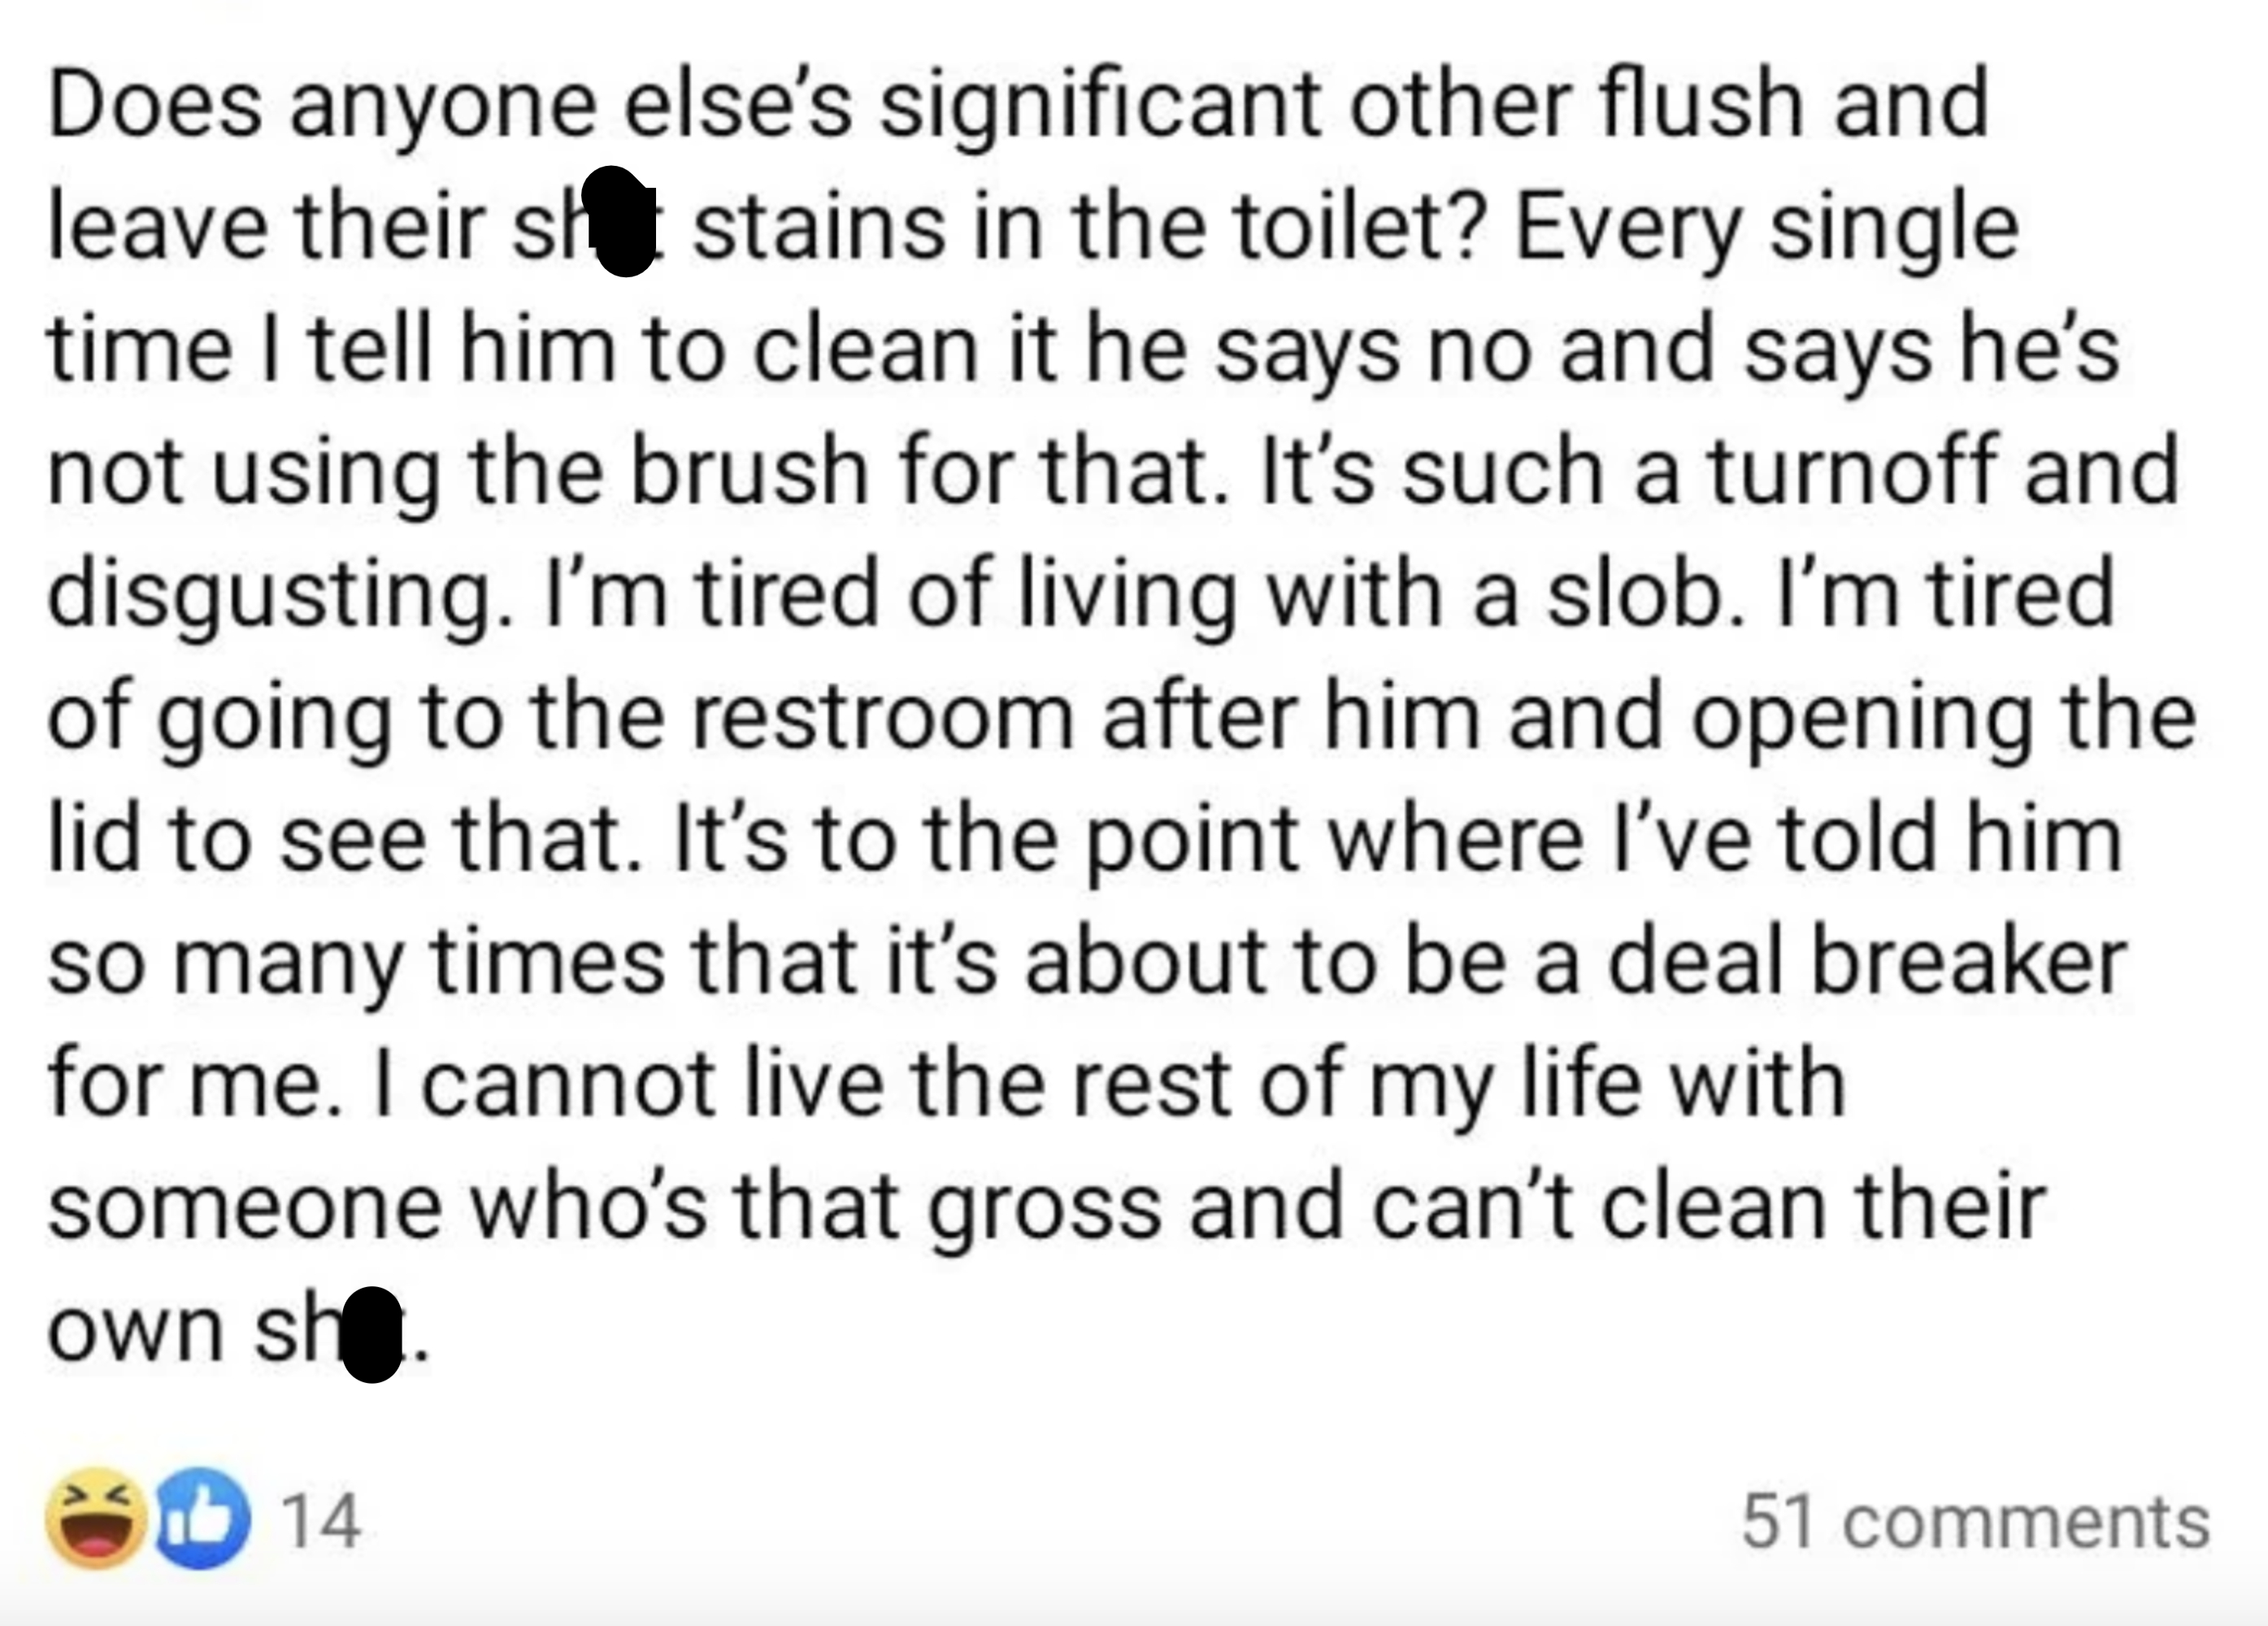 &quot;Every single time i tell him to clean it he says no&quot;